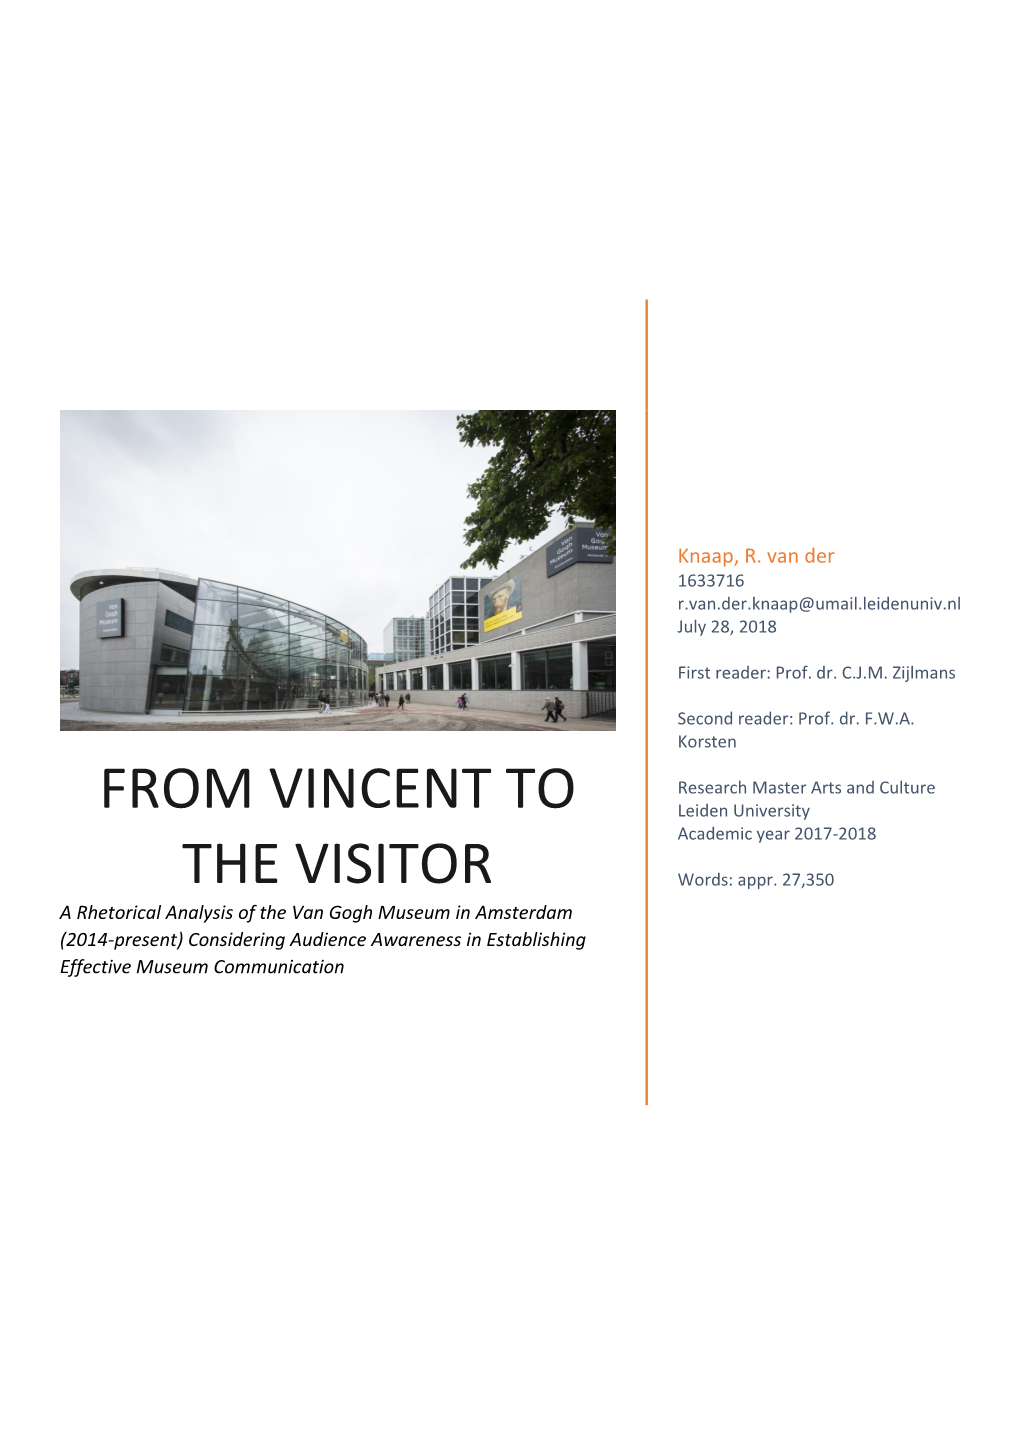 From Vincent to the Visitor” 1